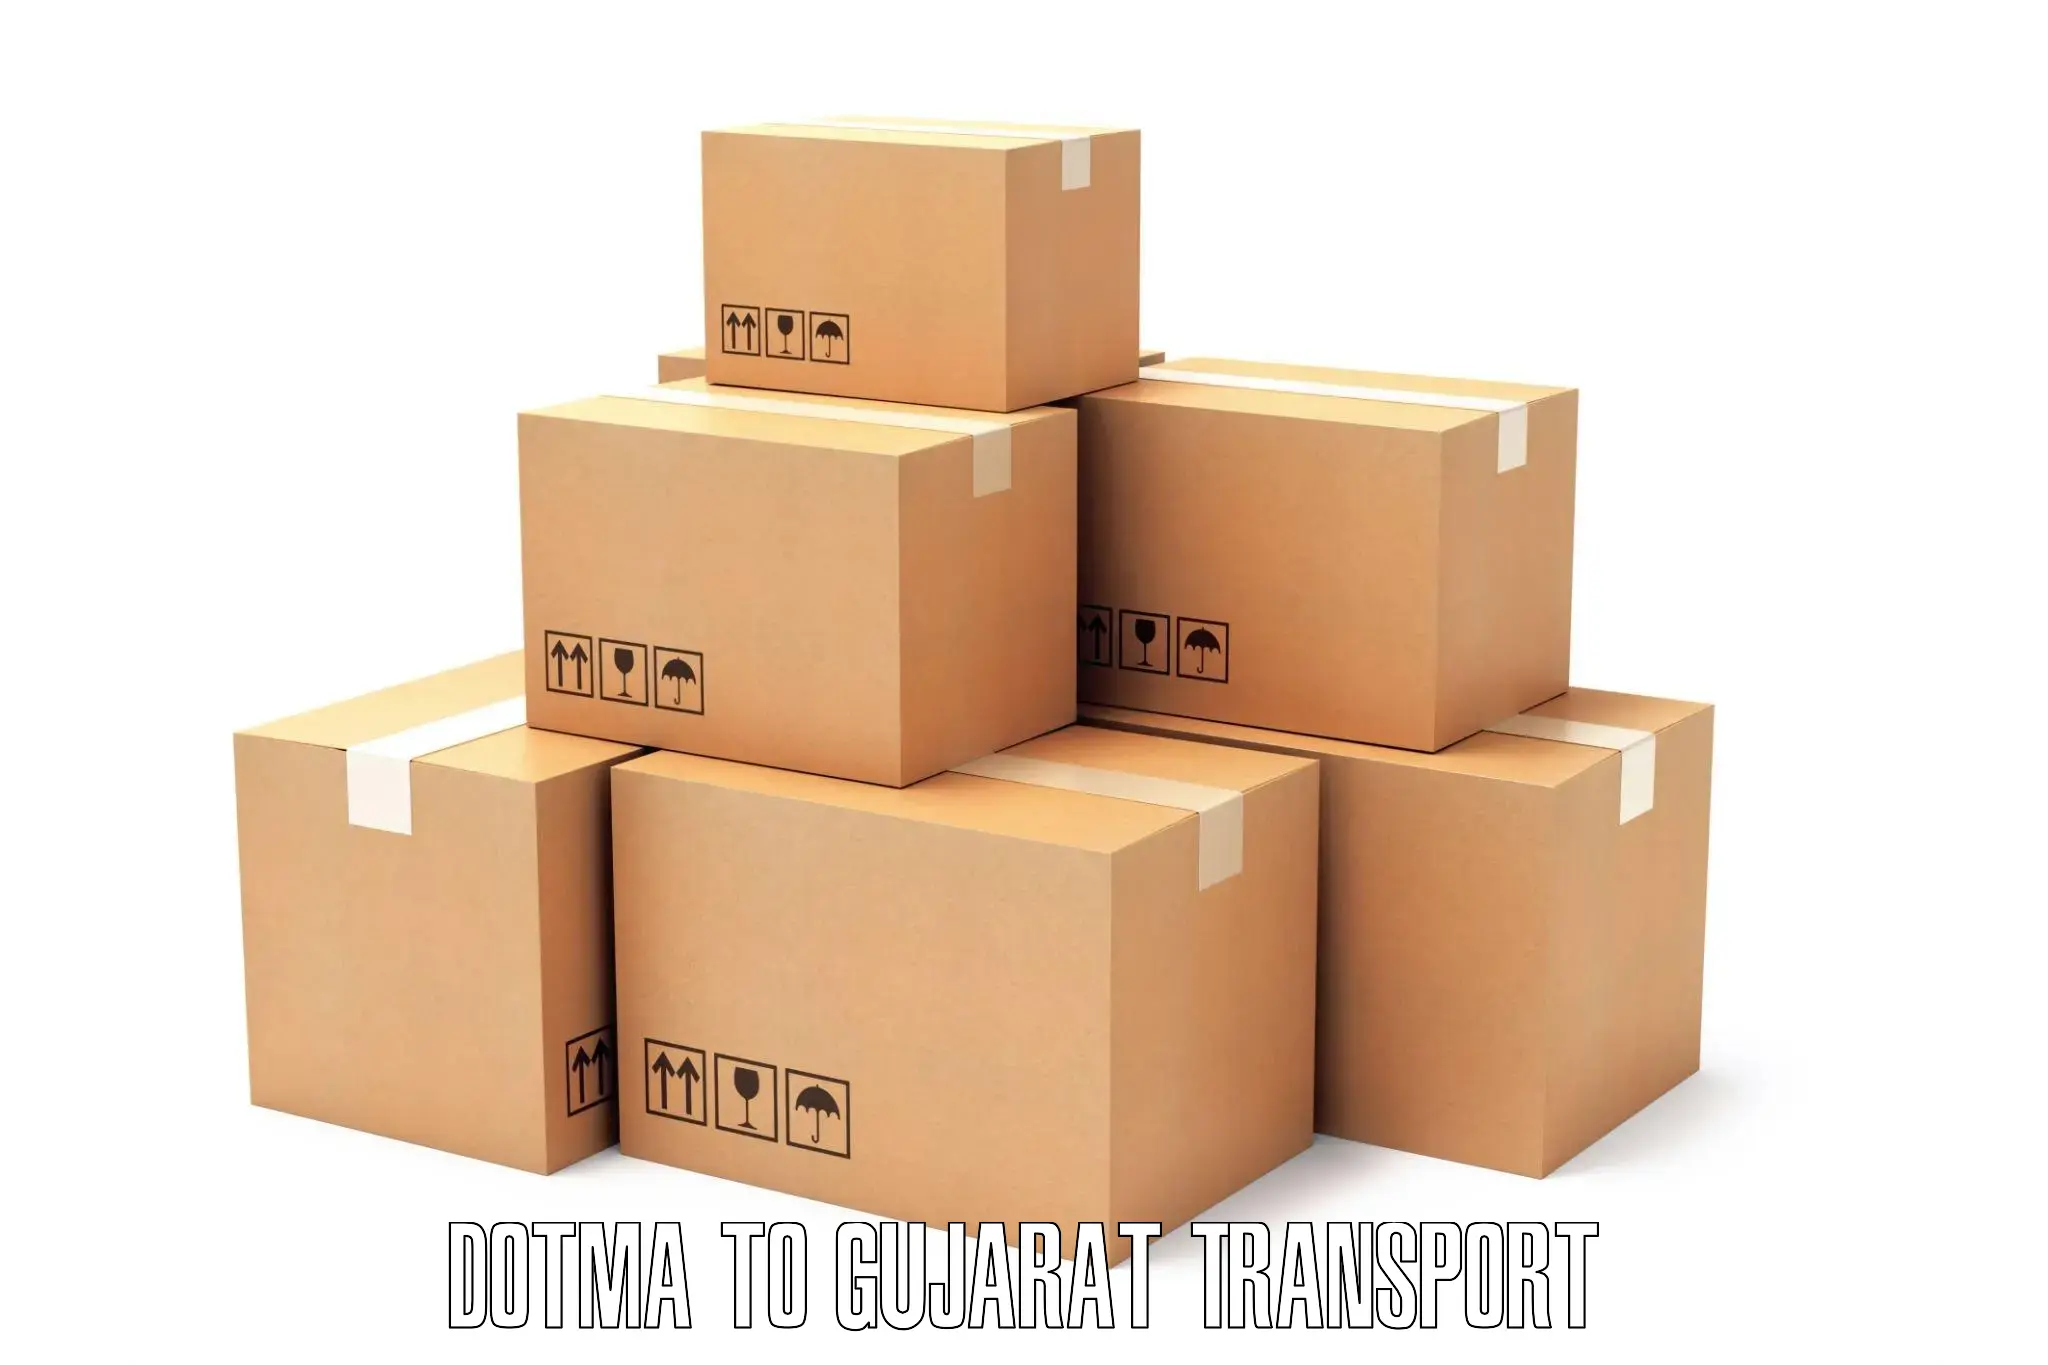 Nearby transport service Dotma to Dholka